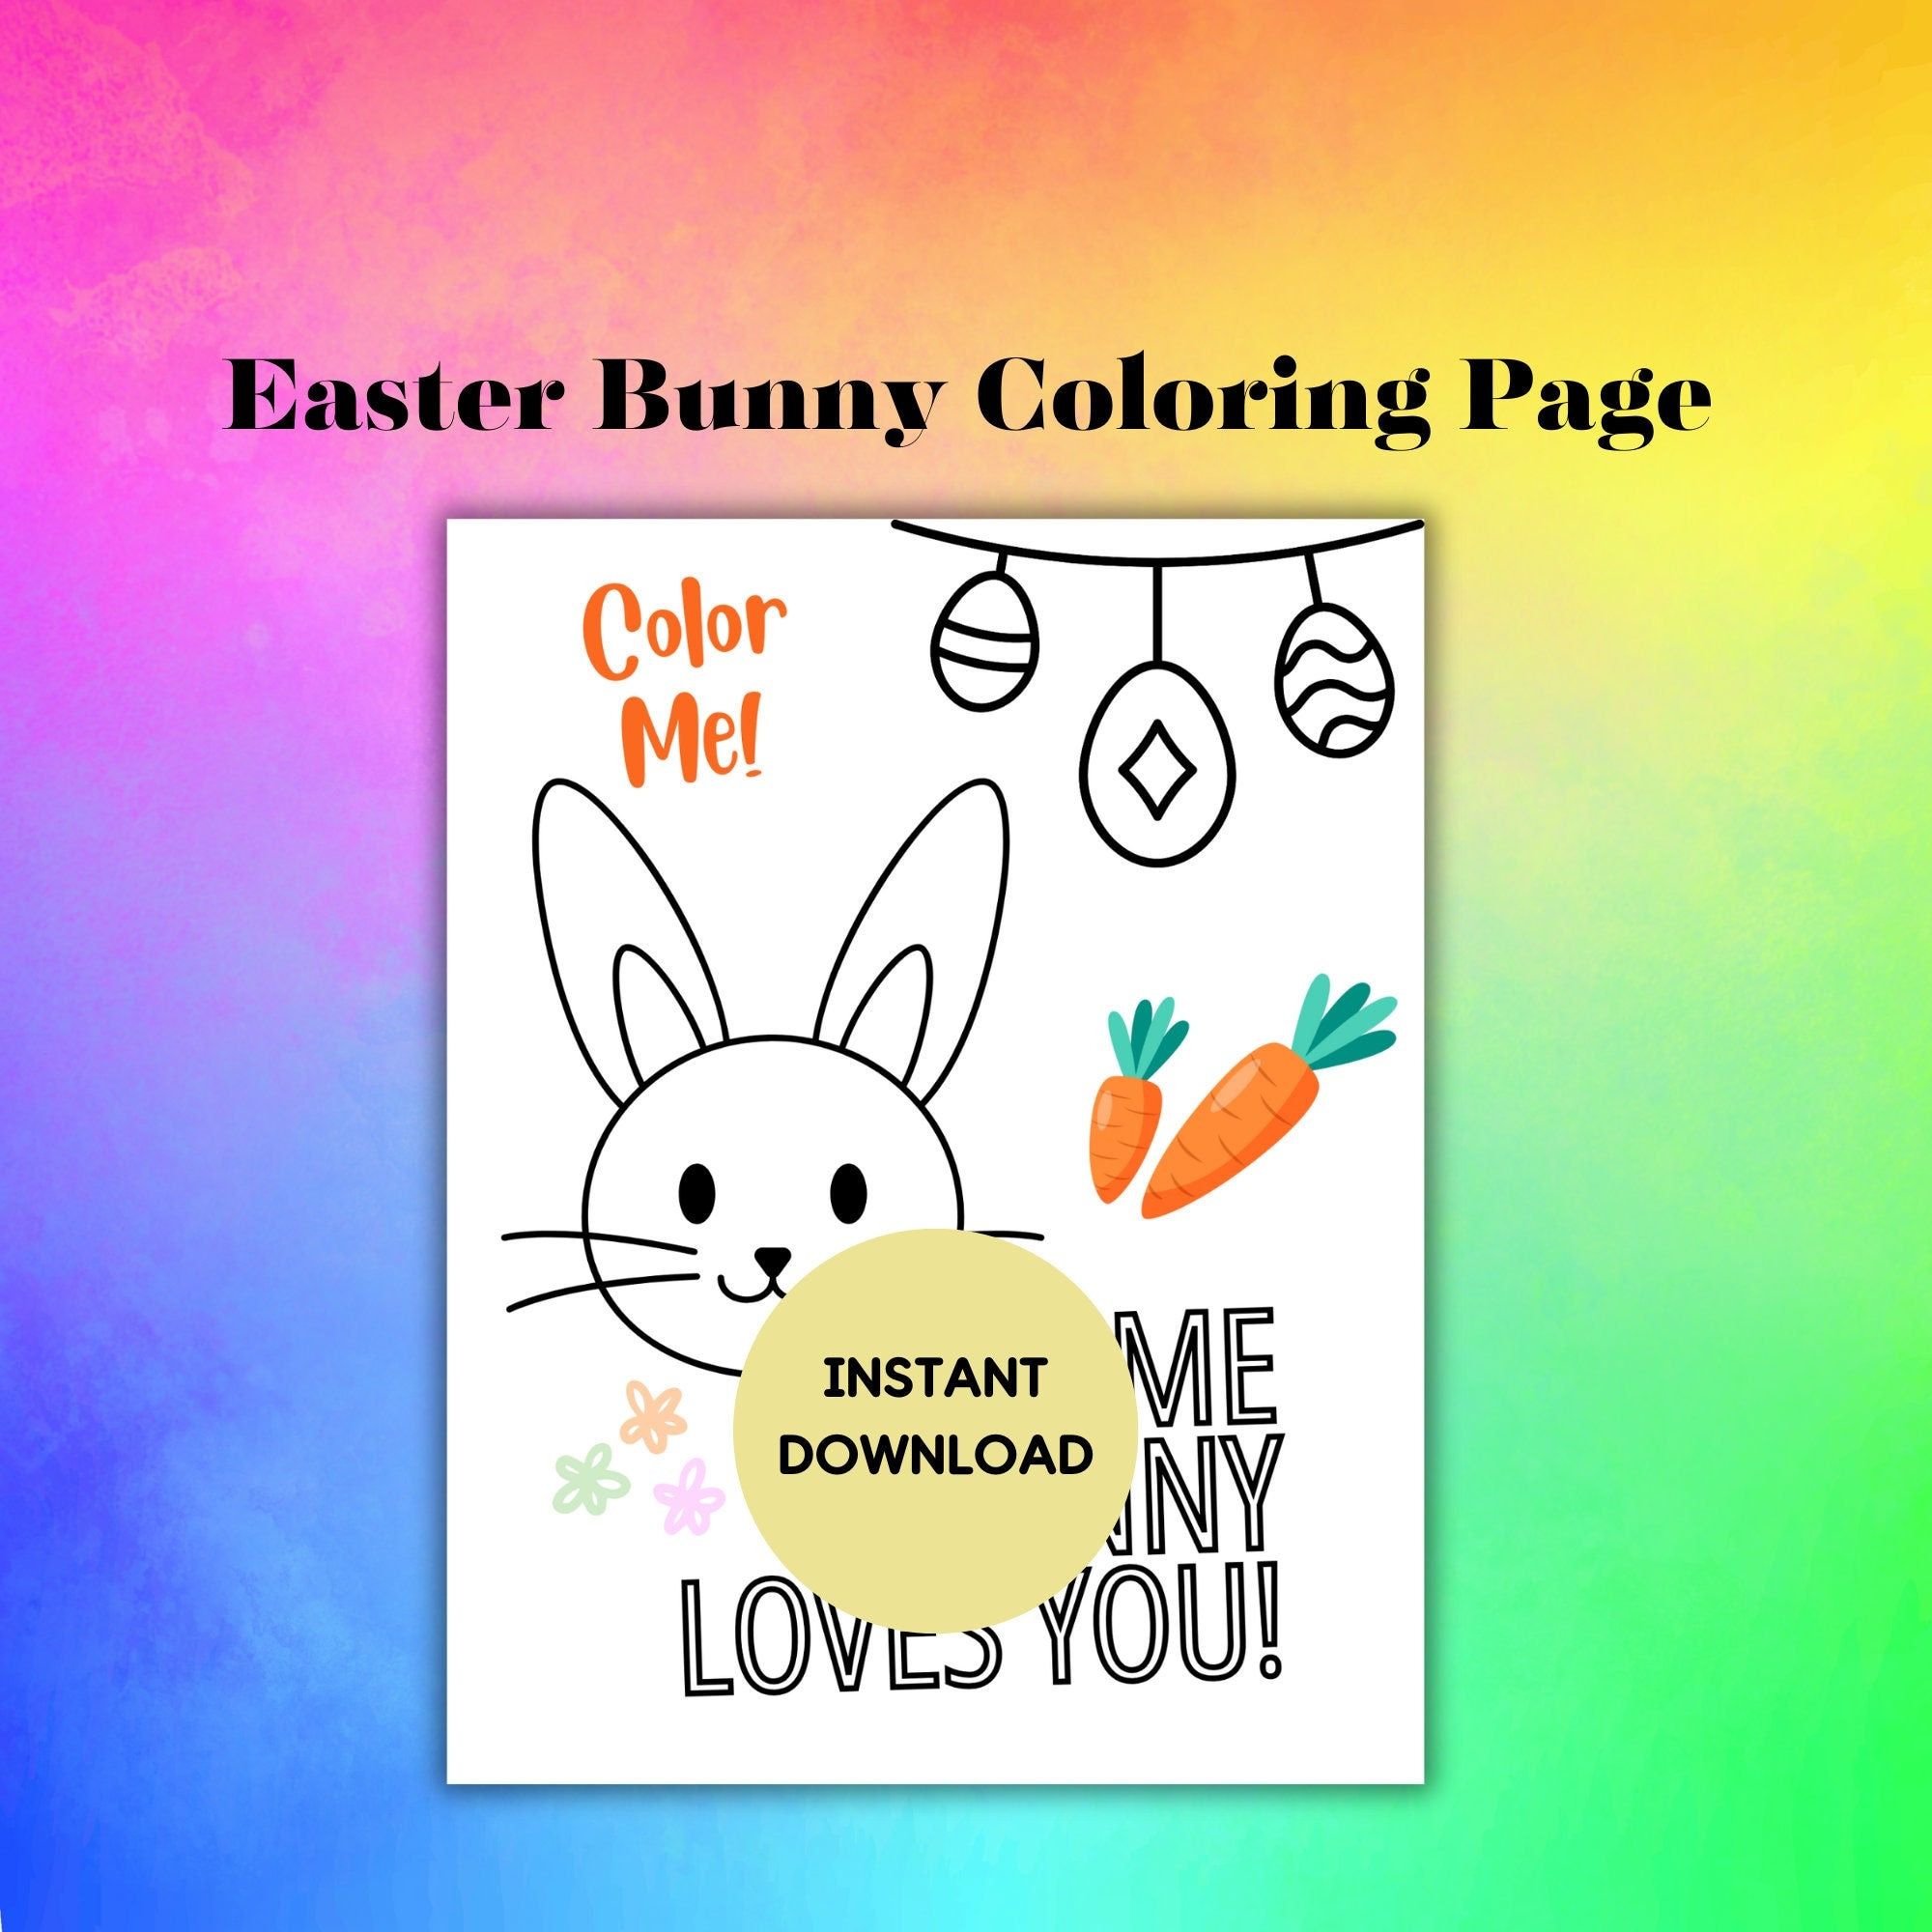 Easter Bunny Coloring Page, Printable, Fun for Kids and Adults, Easter Party, Classroom Activity, Family Activity, Easter Game